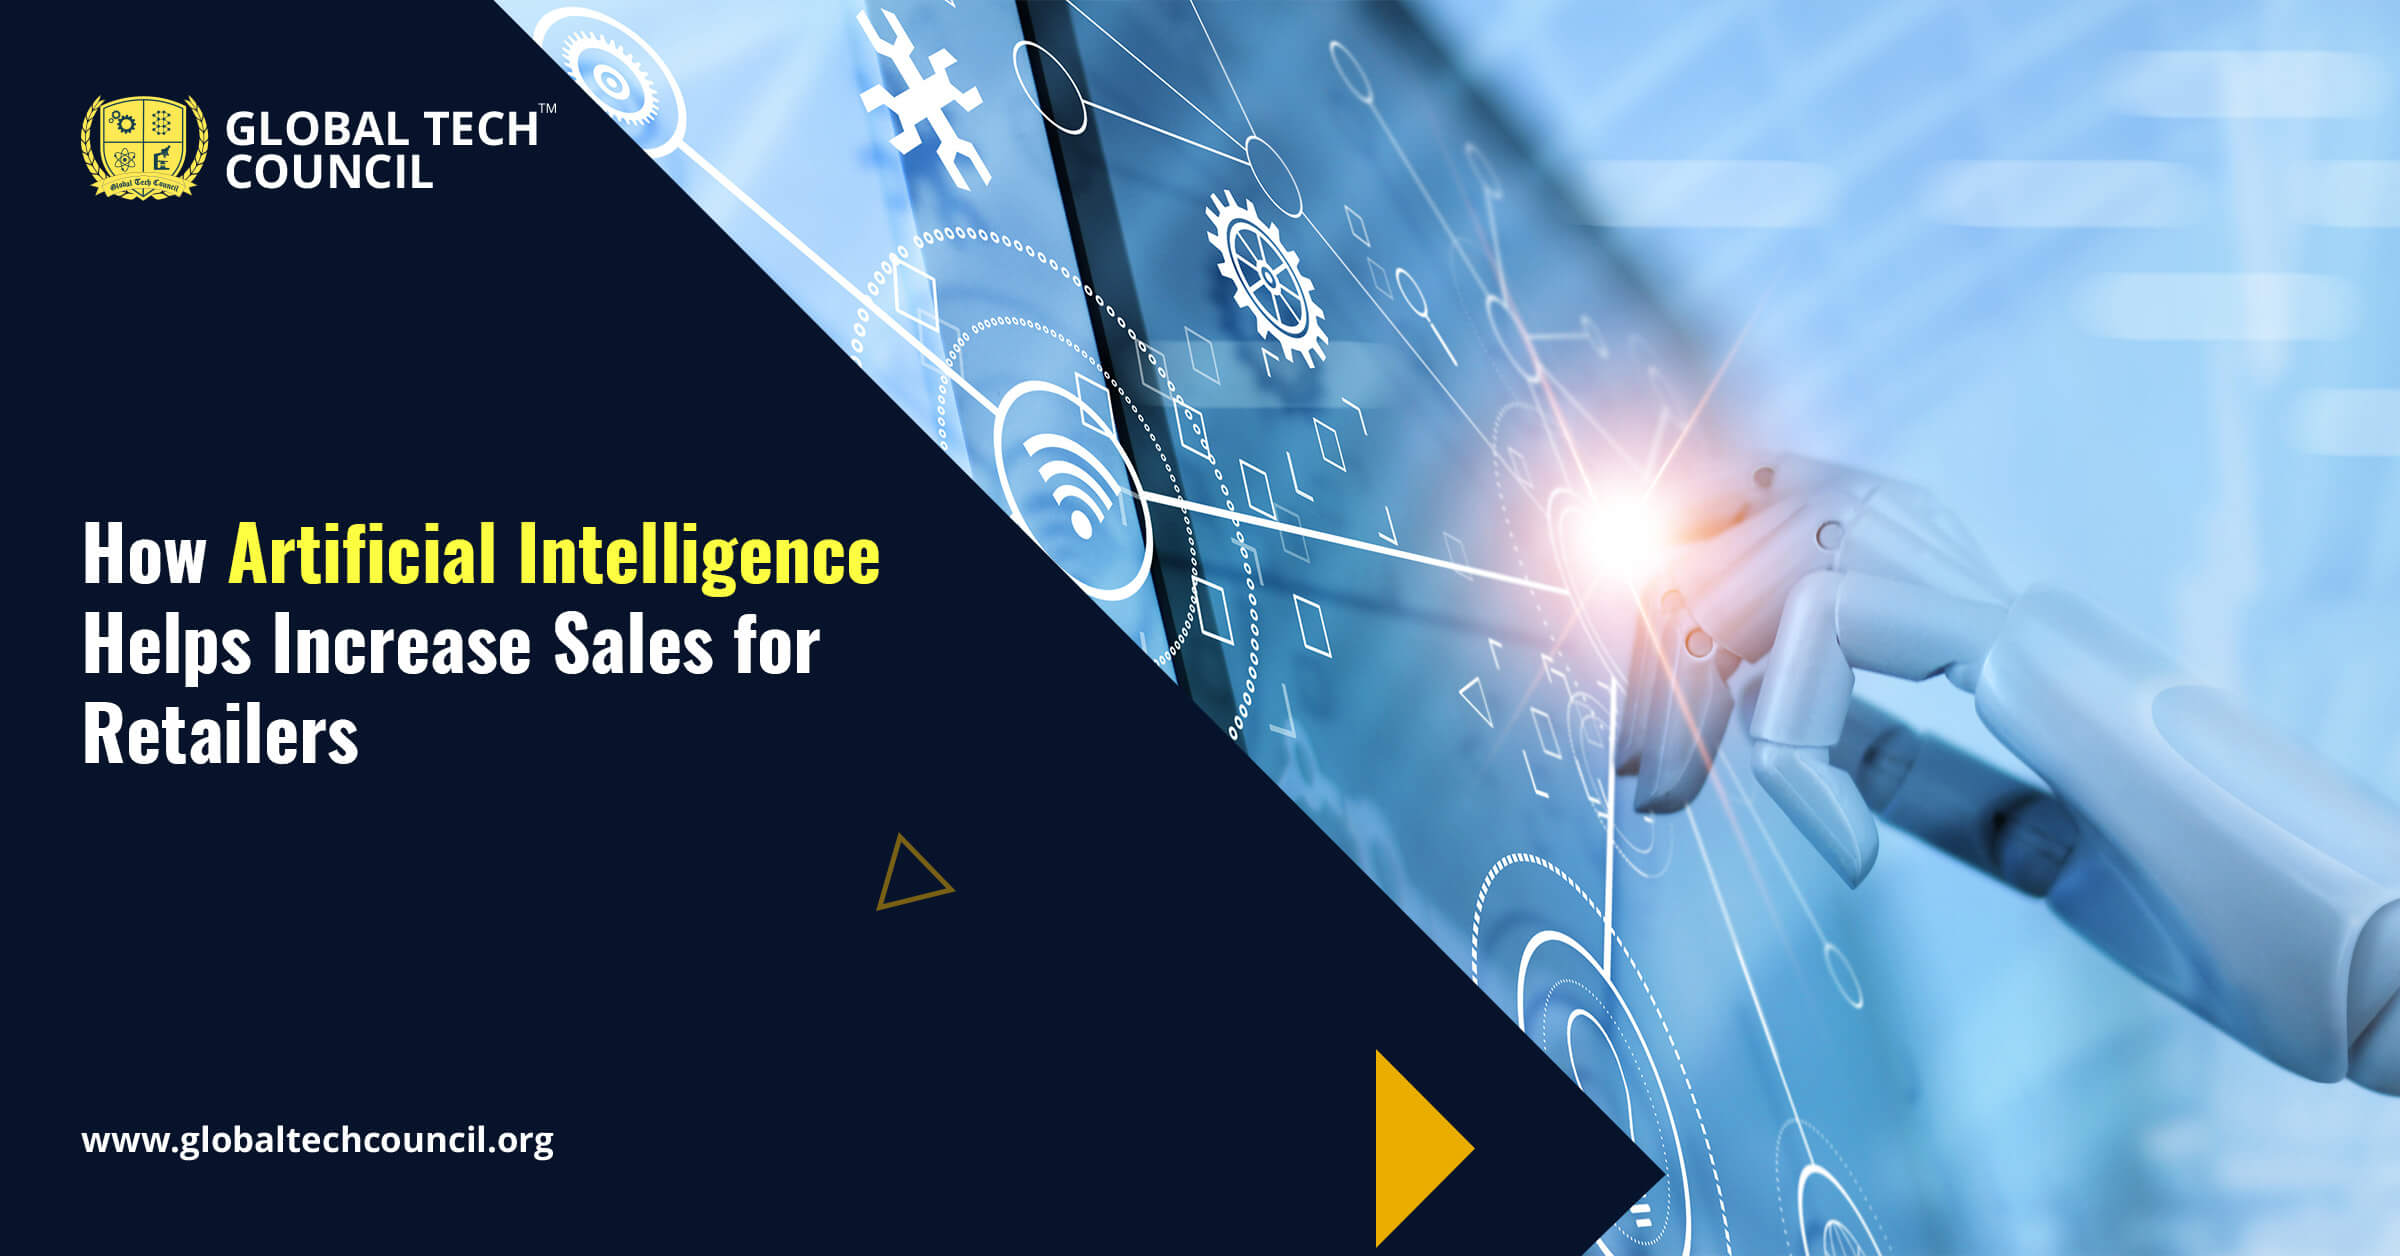 How Artificial Intelligence Helps Increase Sales for Retailers